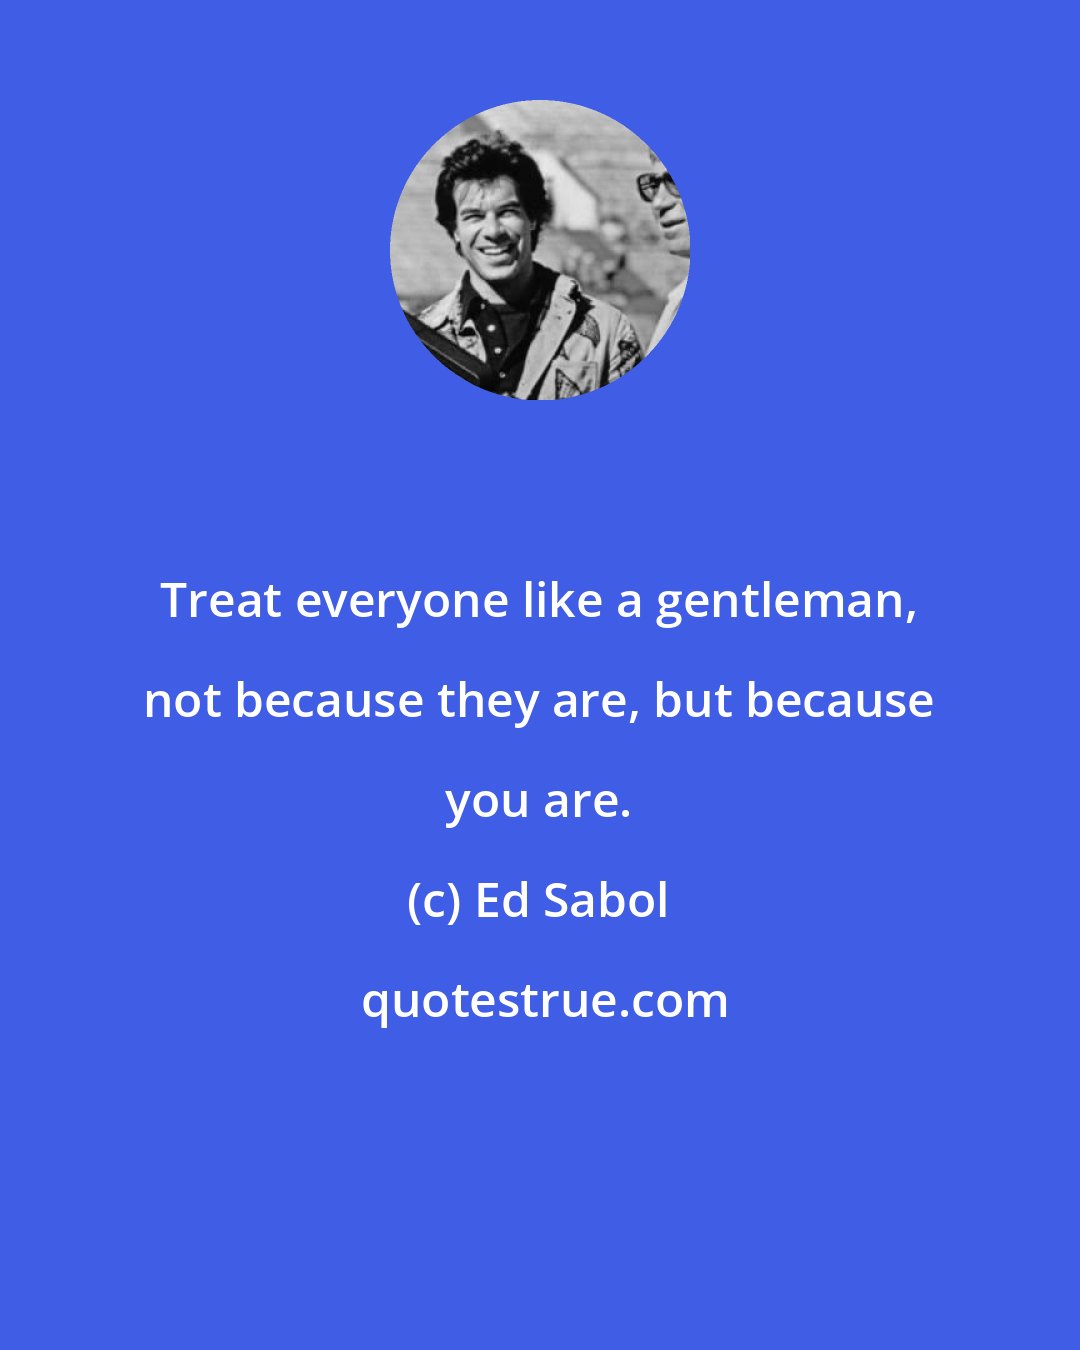 Ed Sabol: Treat everyone like a gentleman, not because they are, but because you are.